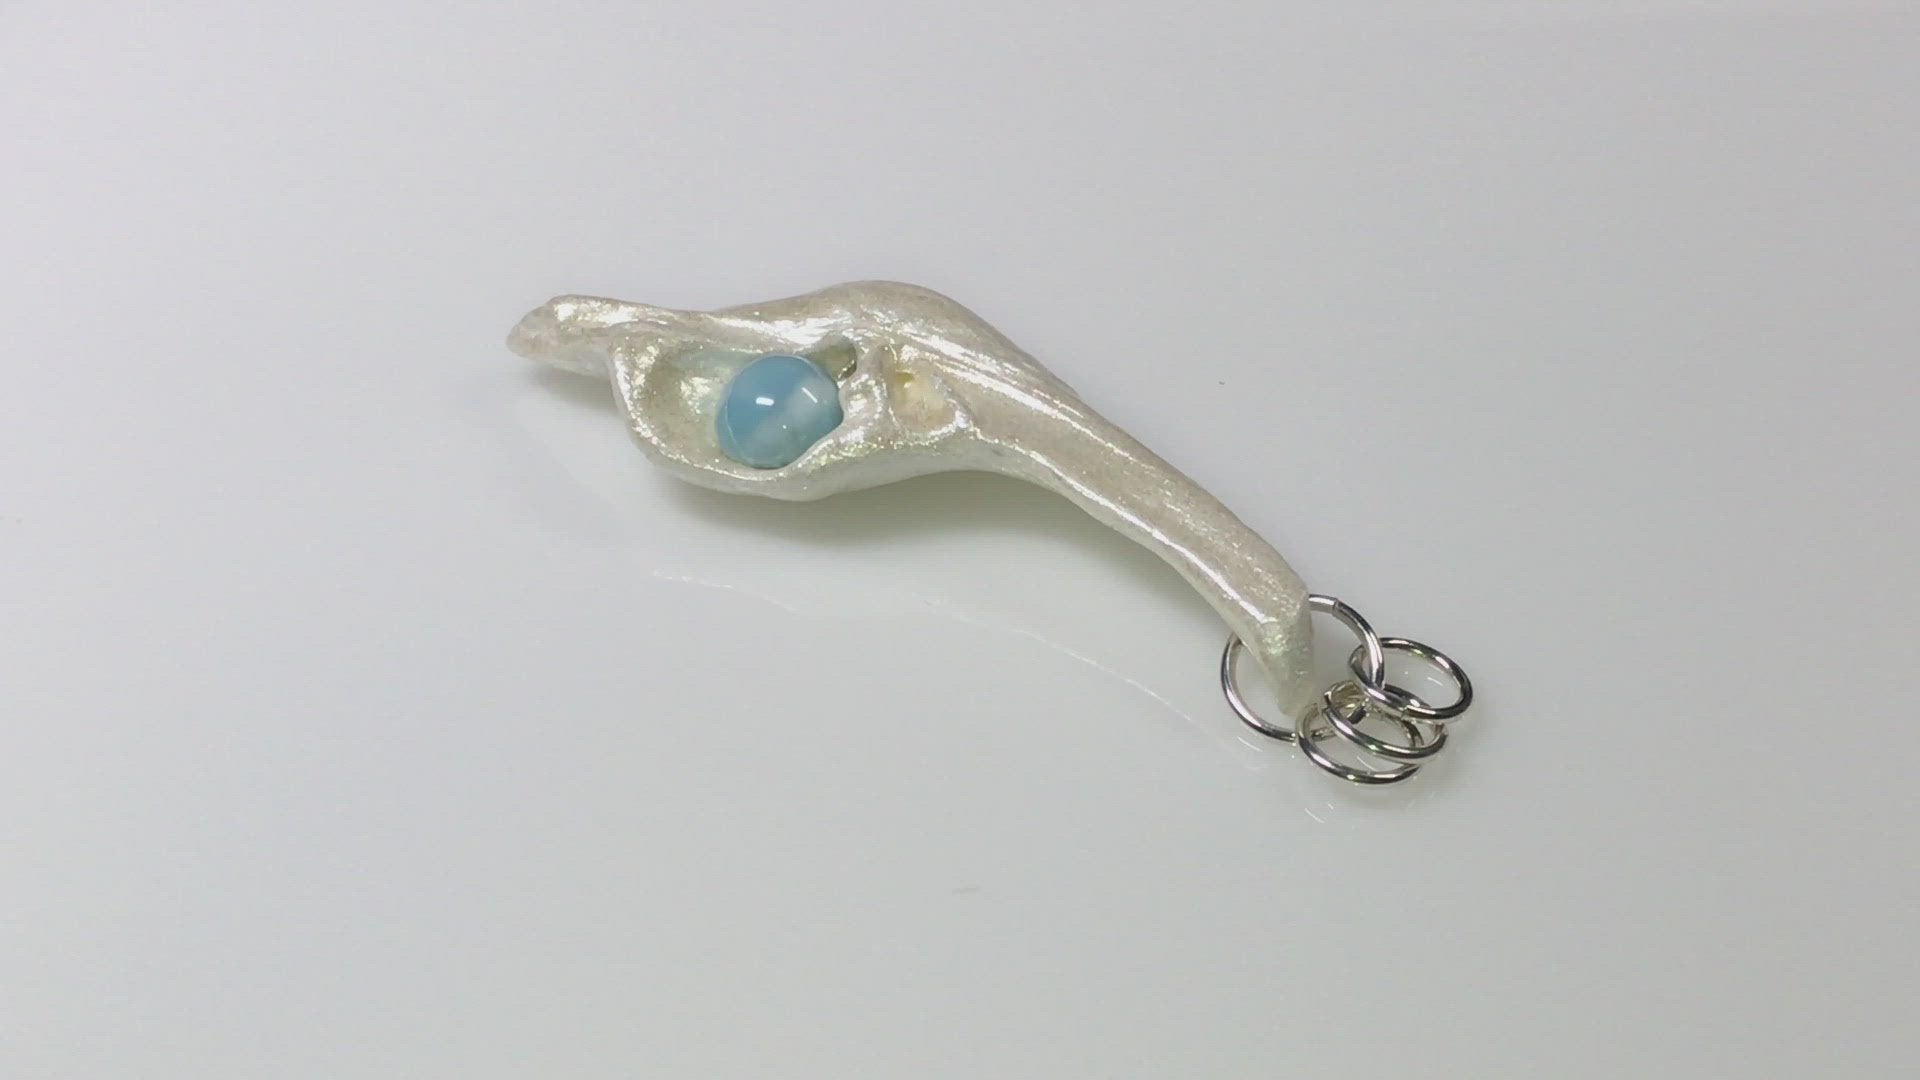 A video showcasing A beautiful 10 mm Round Larimar Gemstone&nbsp;compliments the pendant.